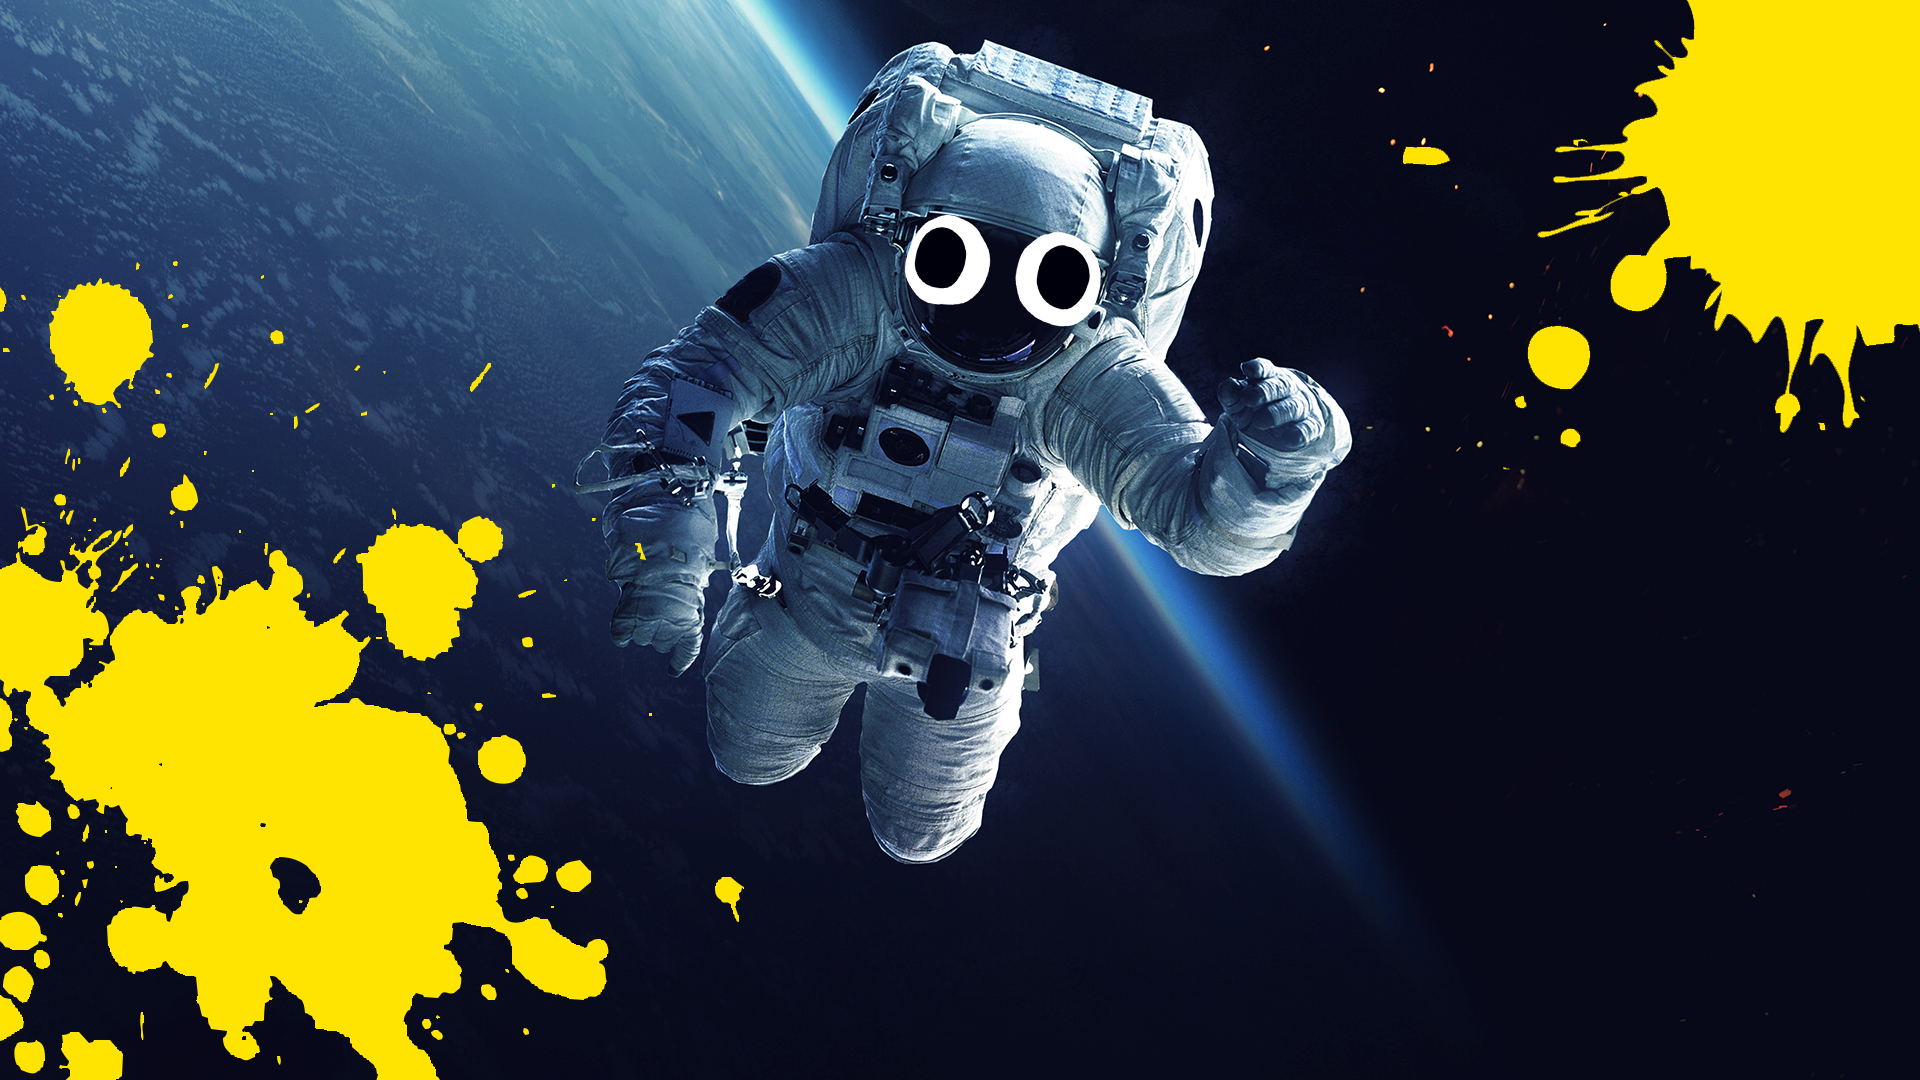 Astronaut in space with yellow splats 